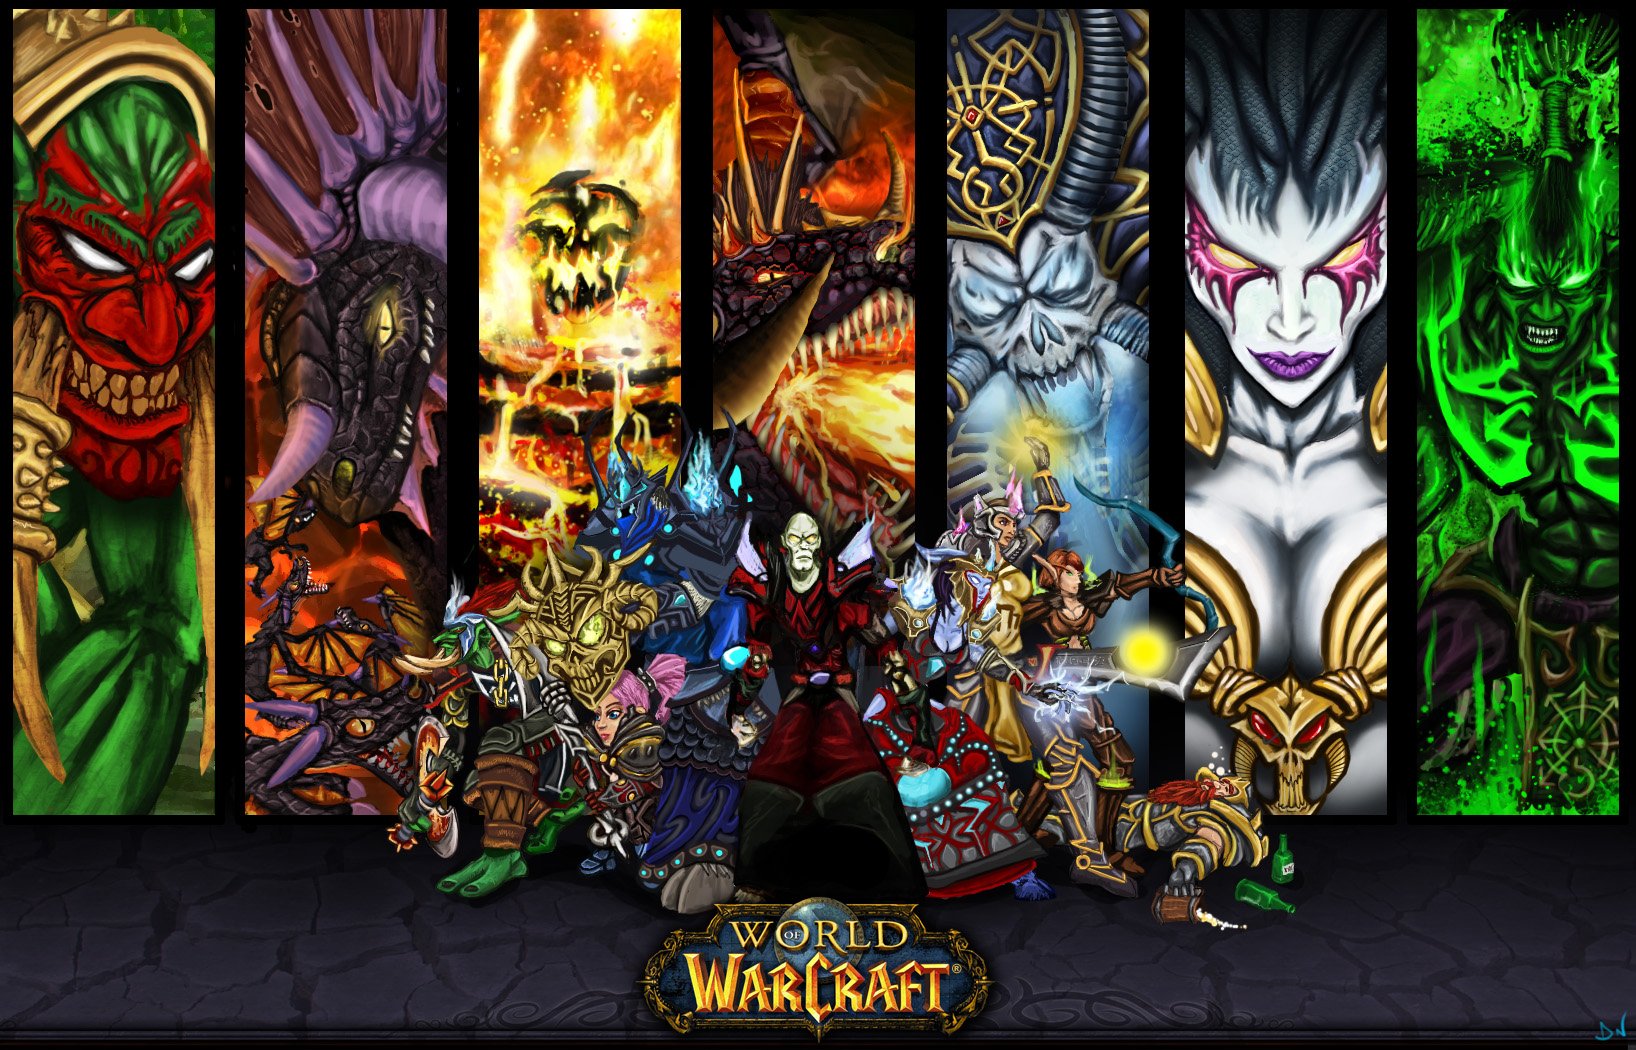 World of Warcraft Exclusive HD Wallpapers 2150 1636x1050